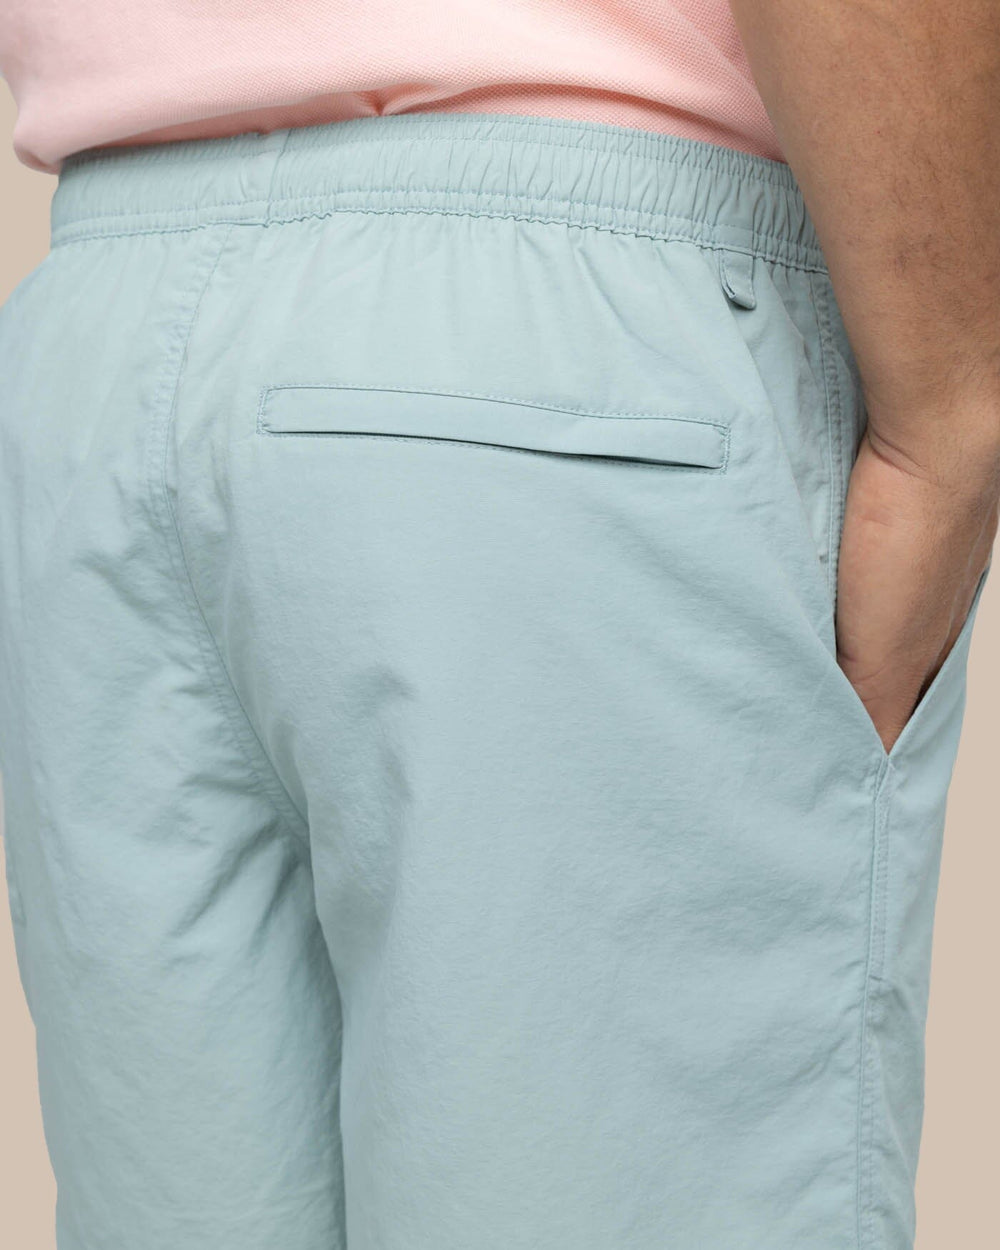 The detail view of the Southern Tide Shoreline 6 Nylon Short by Southern Tide - Green Surf